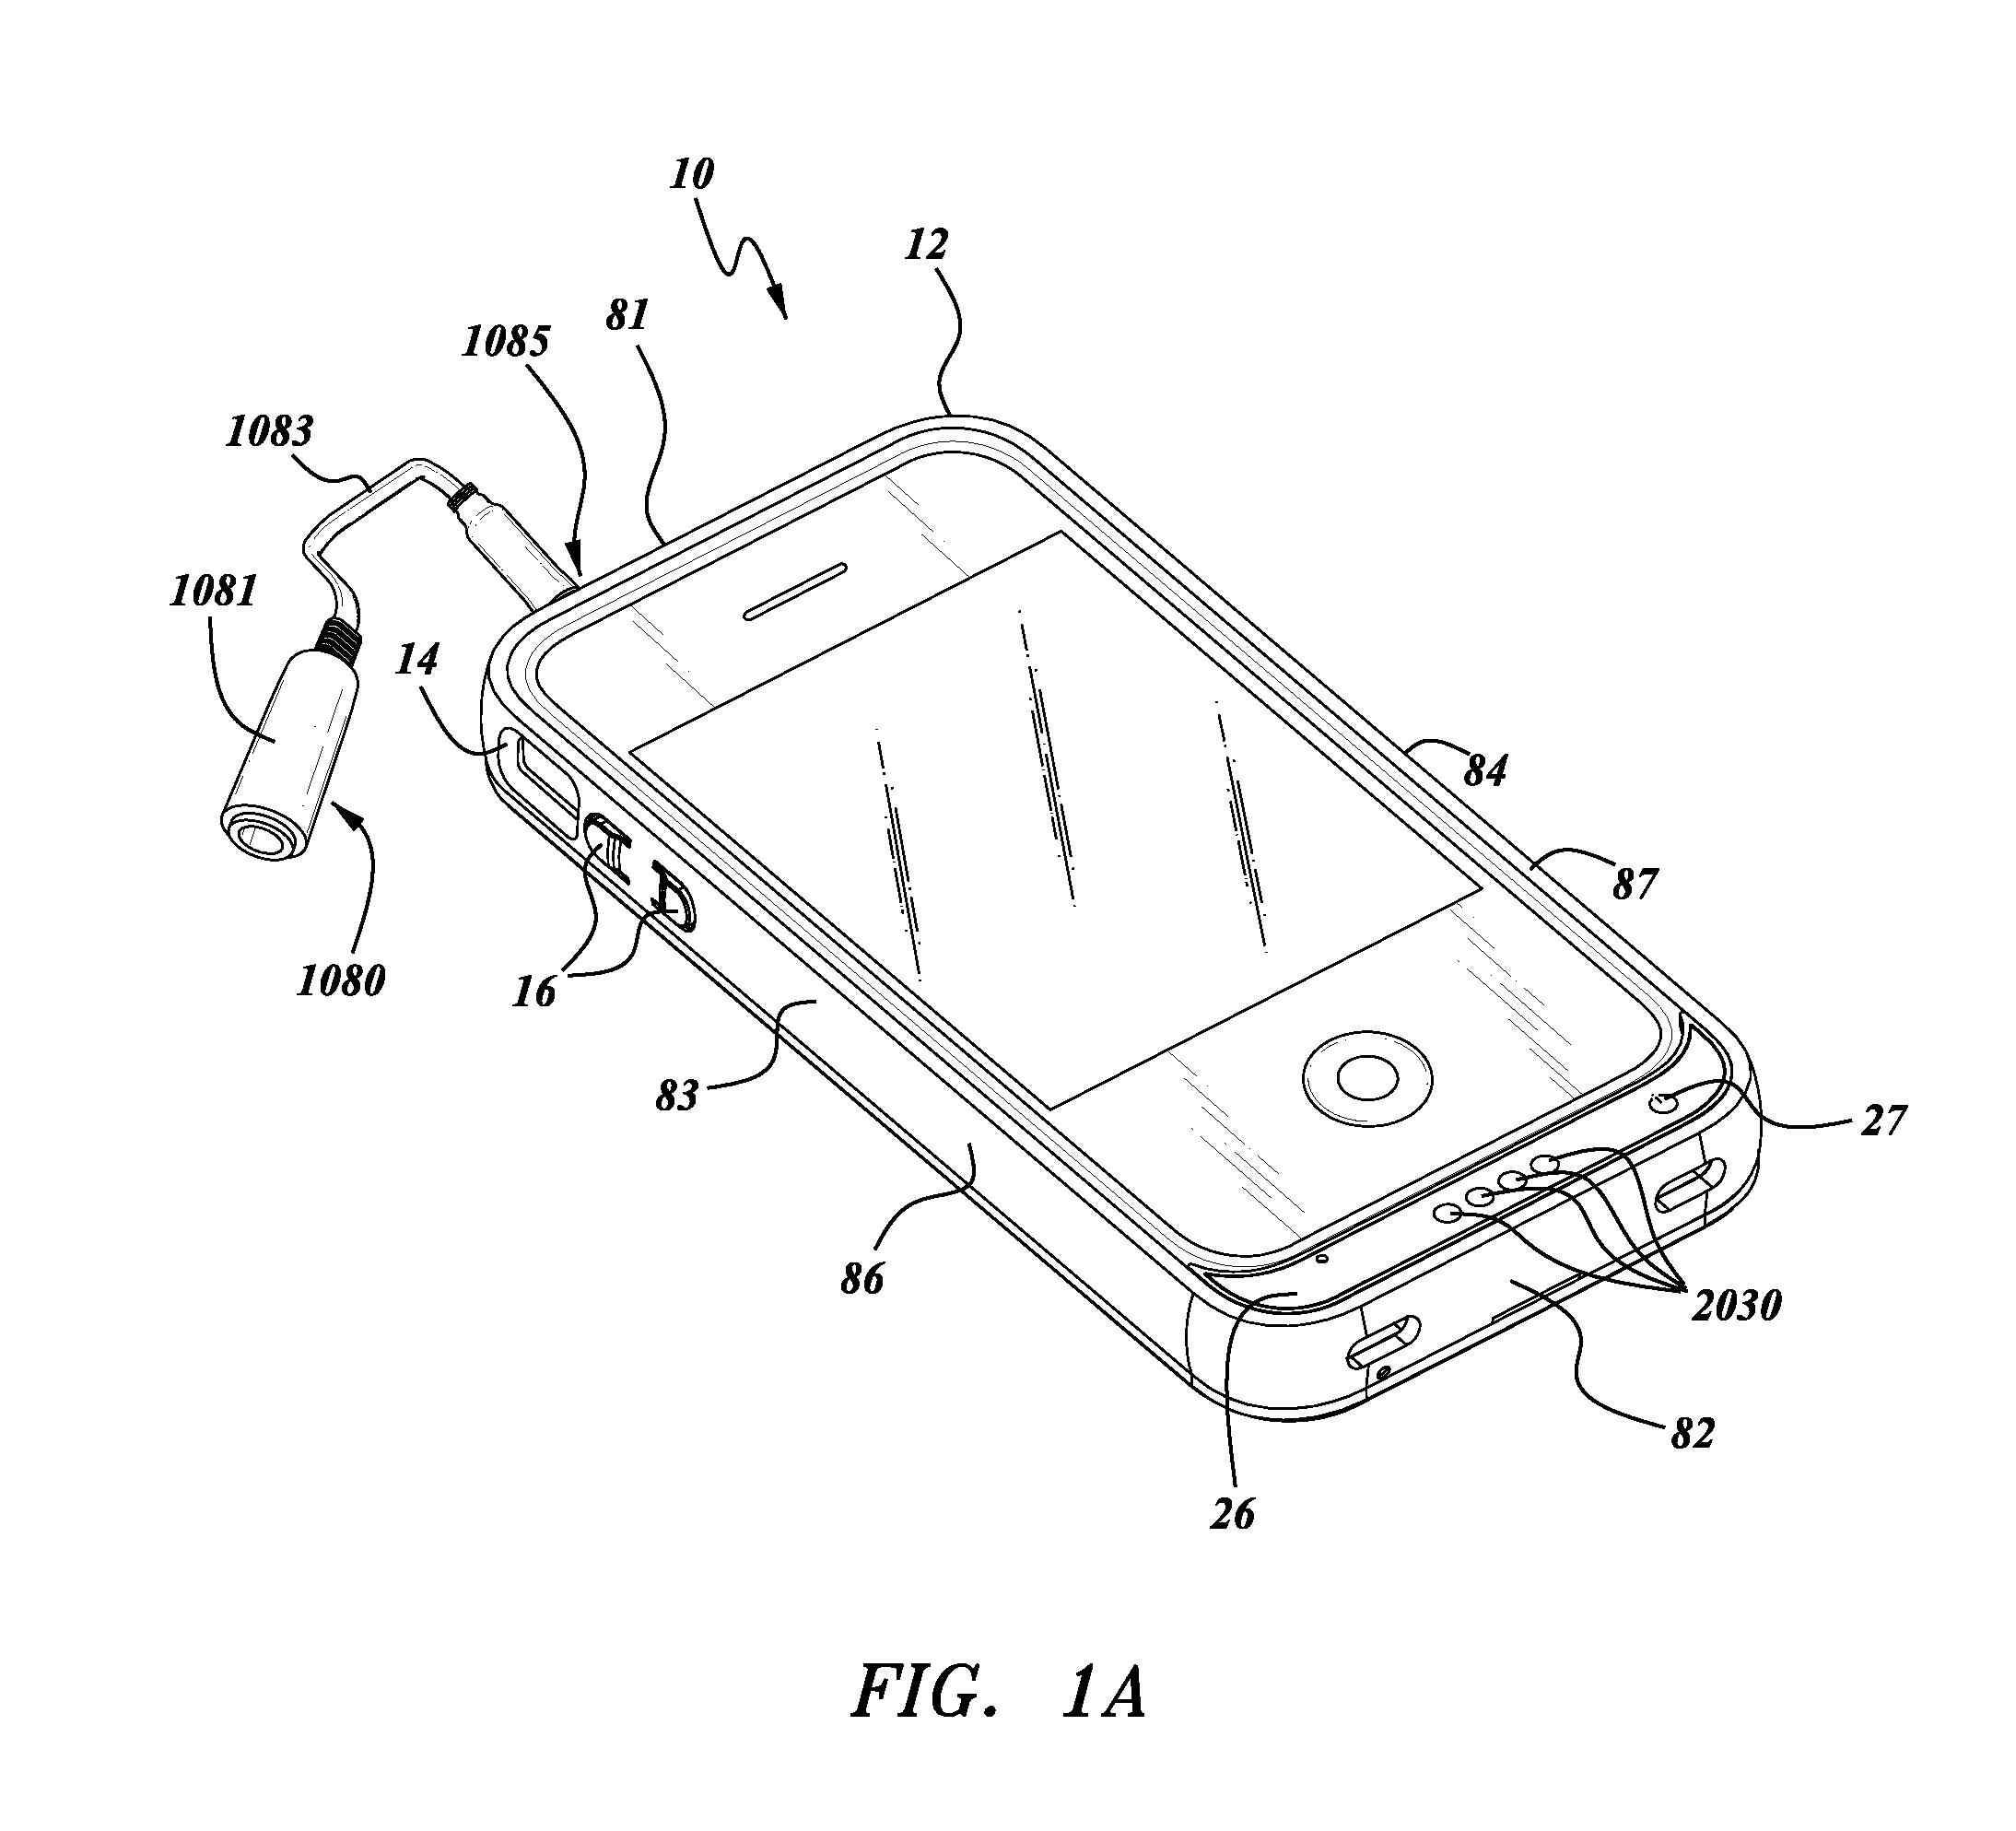 Battery case for mobile device